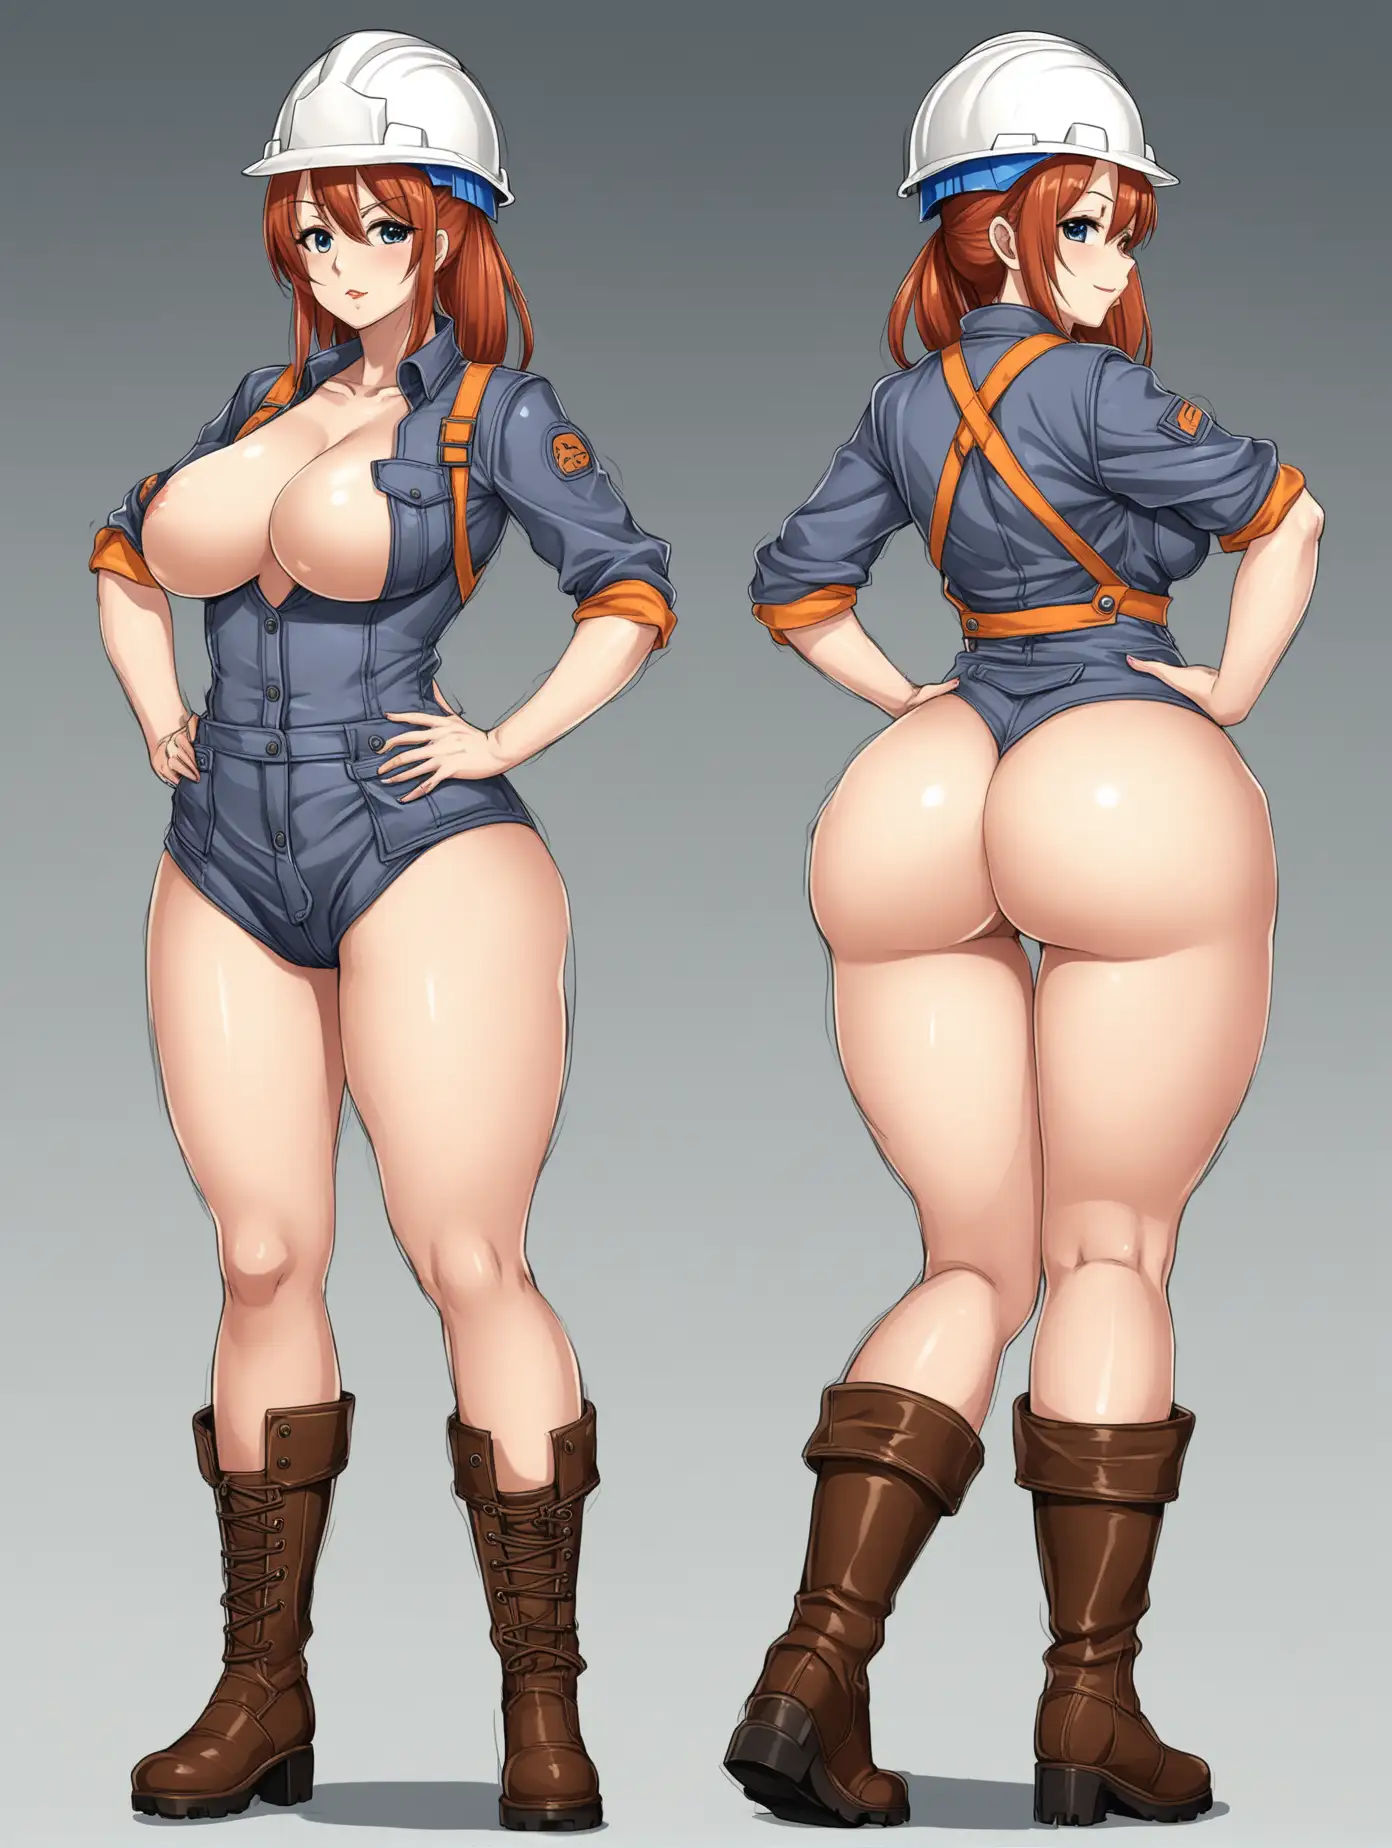 Sensual picture of a hot anime girl, age 30, builder outfit, big ass, wearing boots, 2 poses, full body